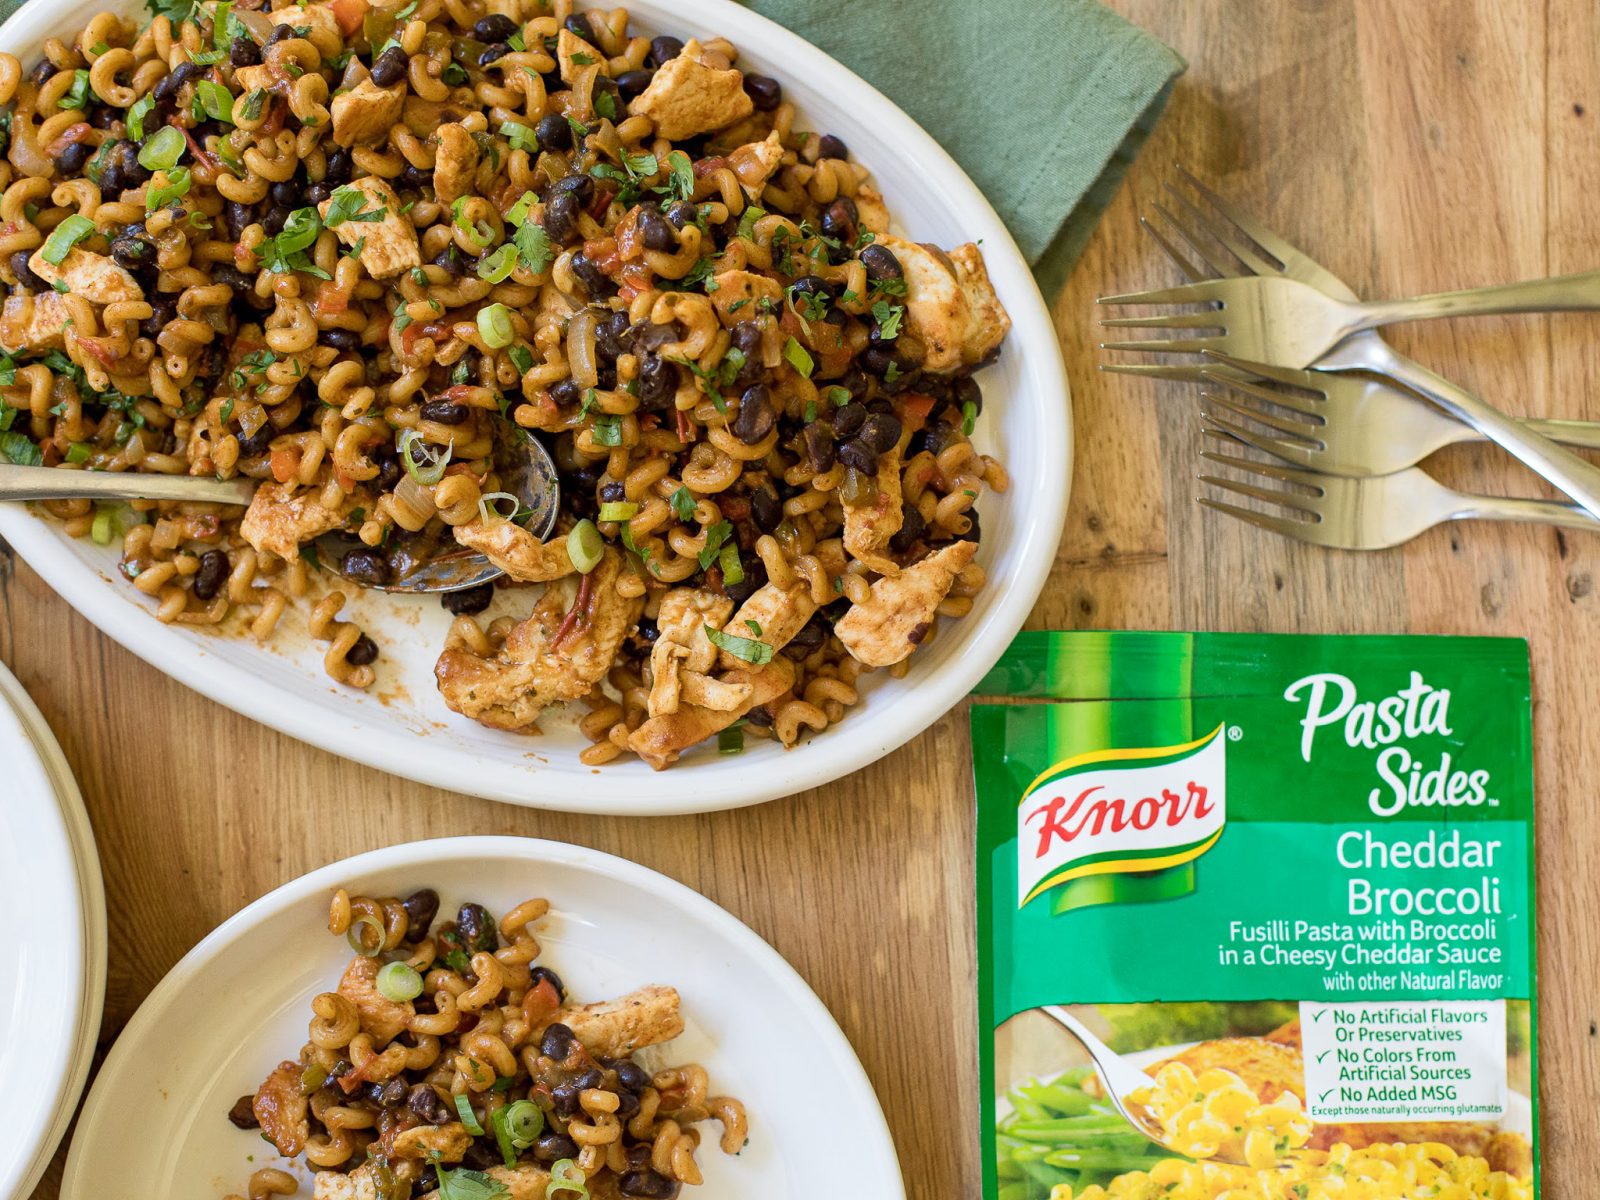 Back To School Dinners Made Easy With Knorr + Earn A $5 Gift Card With The Mix & Match Grocery Promo Powered By Fetch Rewards